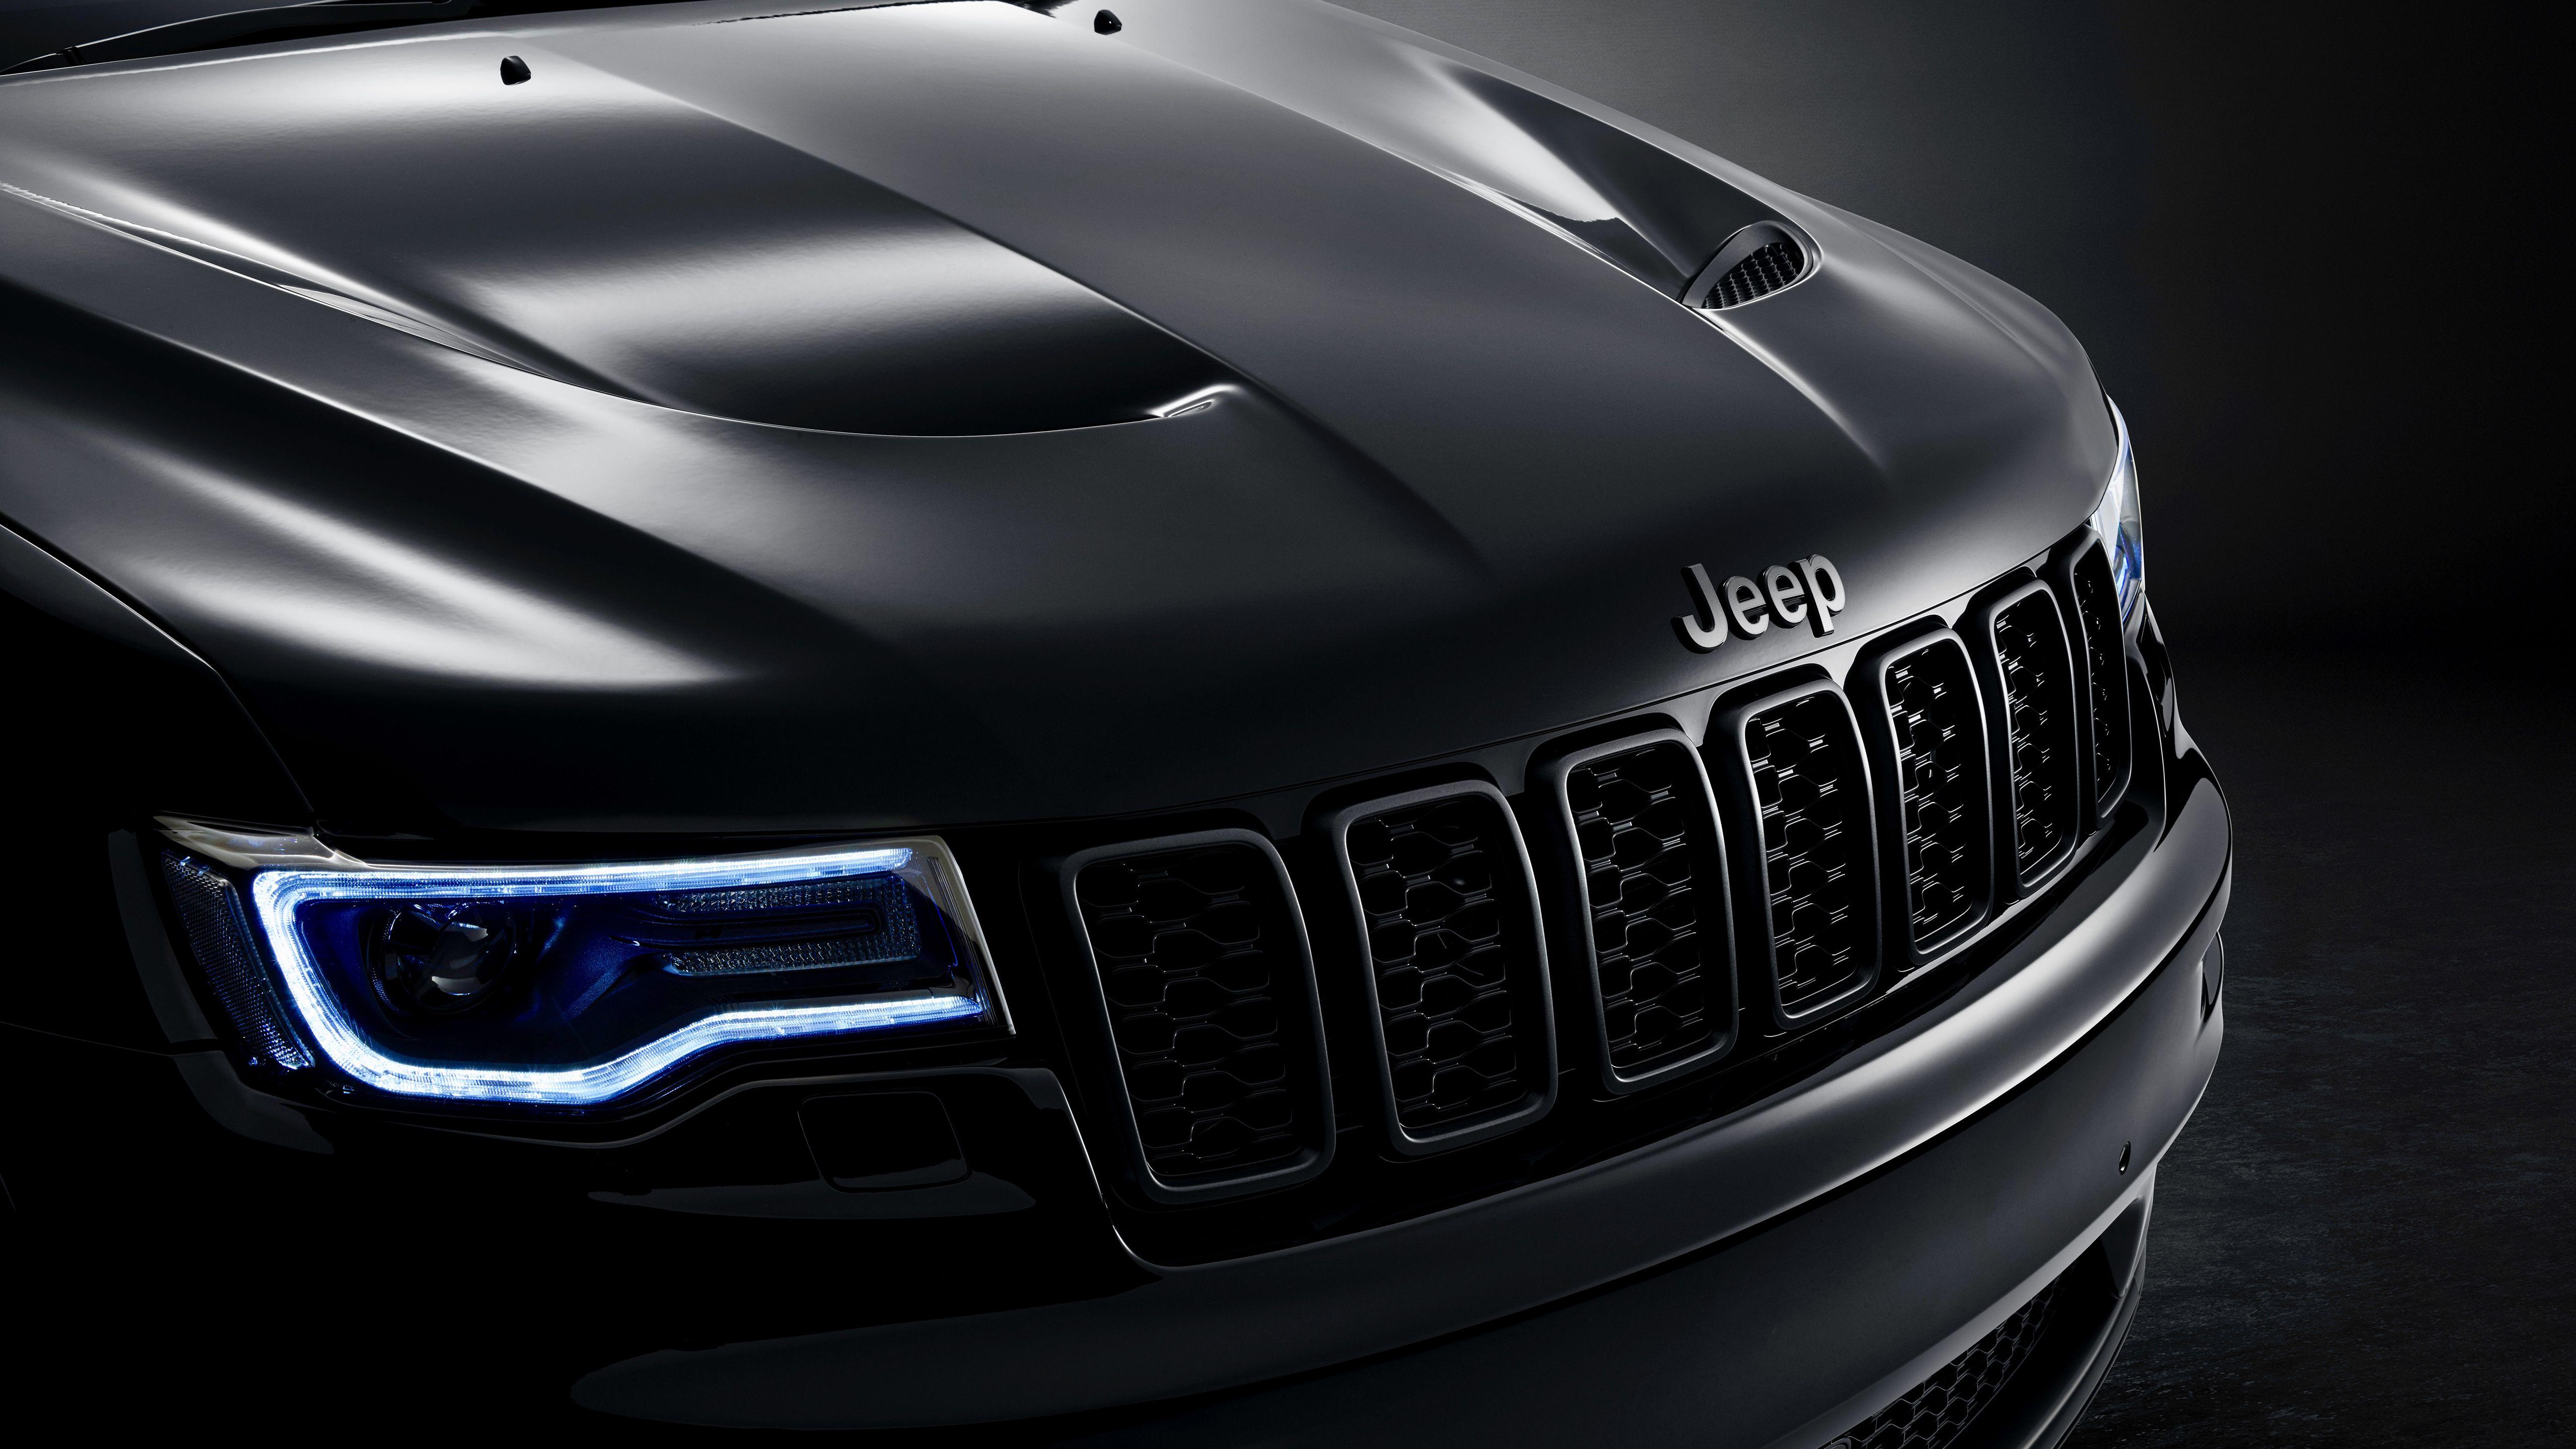 Jeep Cherokee Wallpapers Top Free Jeep Cherokee Backgrounds Wallpaperaccess